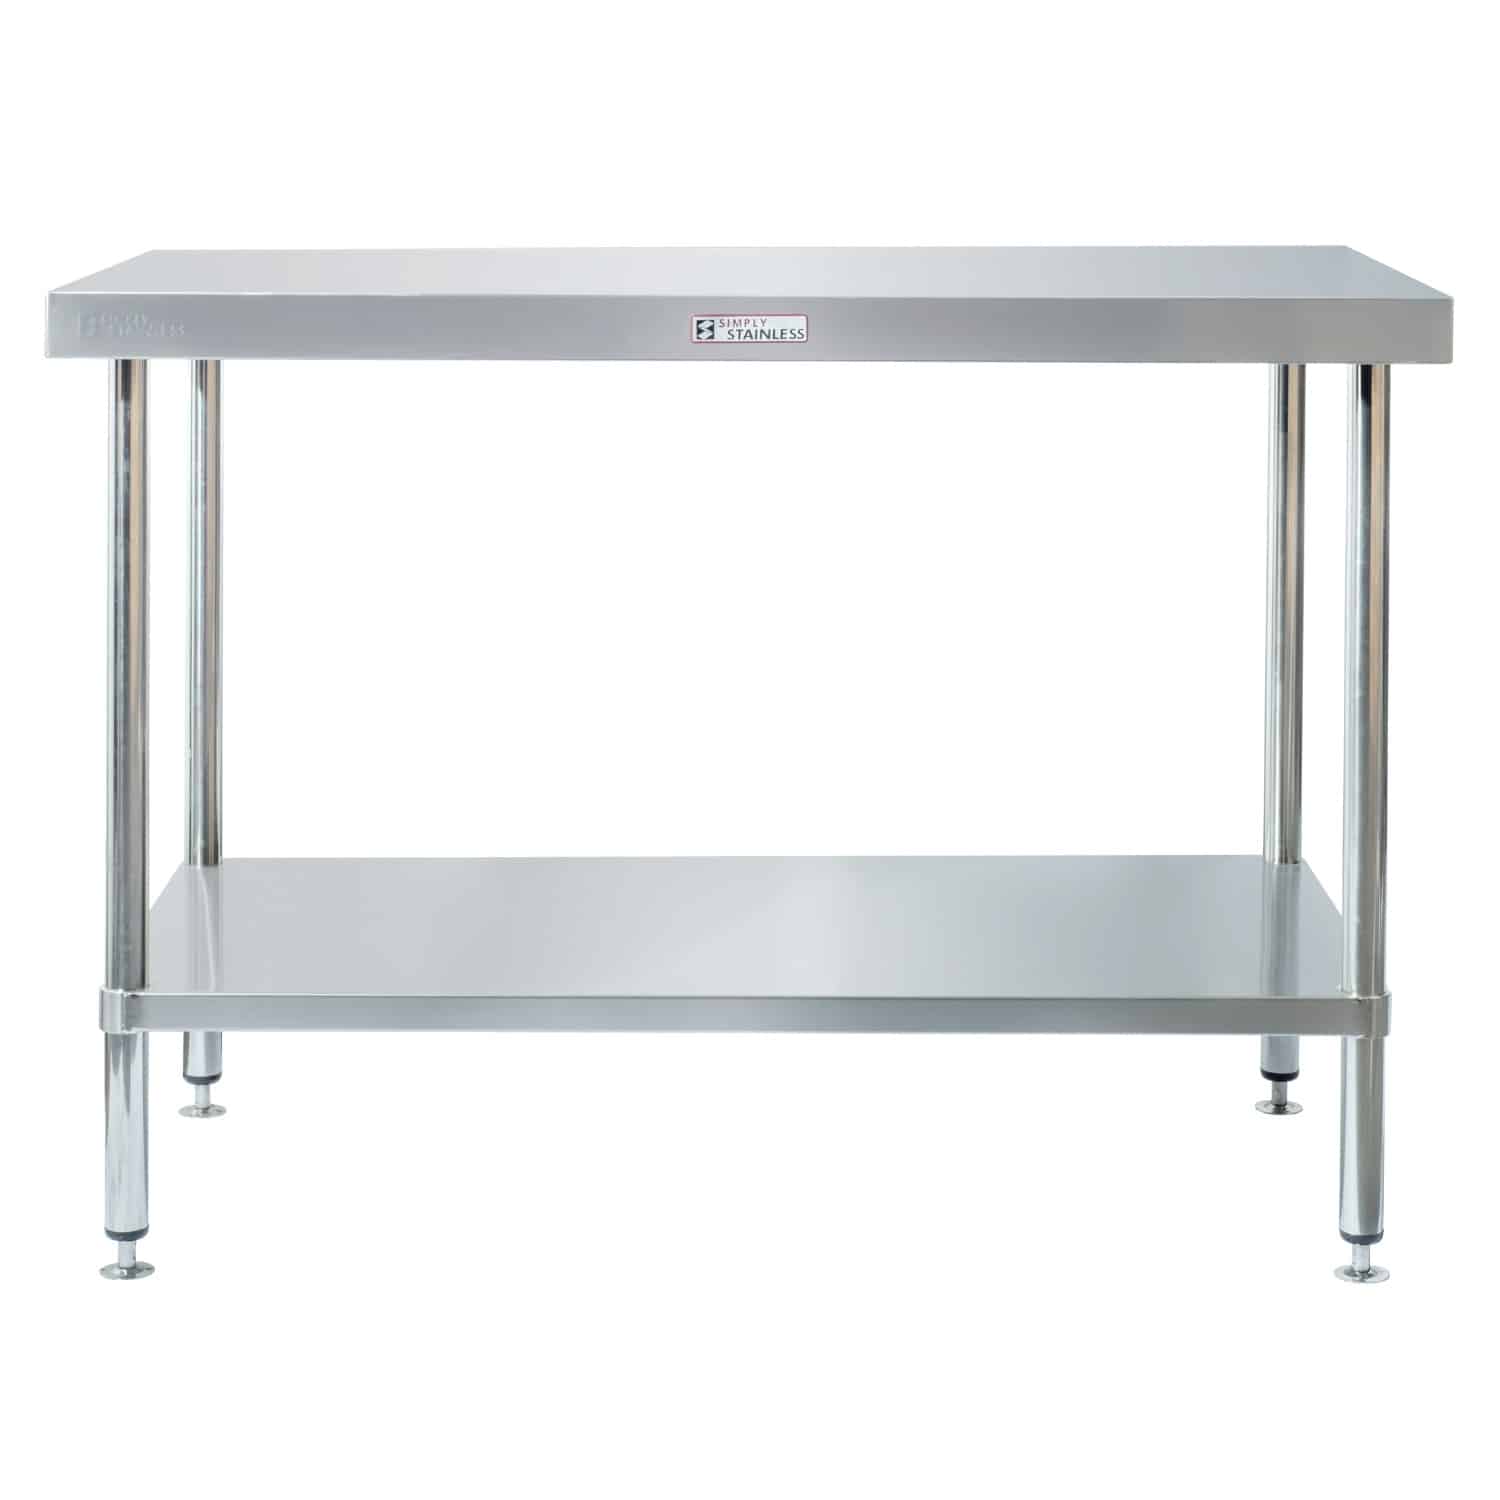 Simply Stainless Workbench